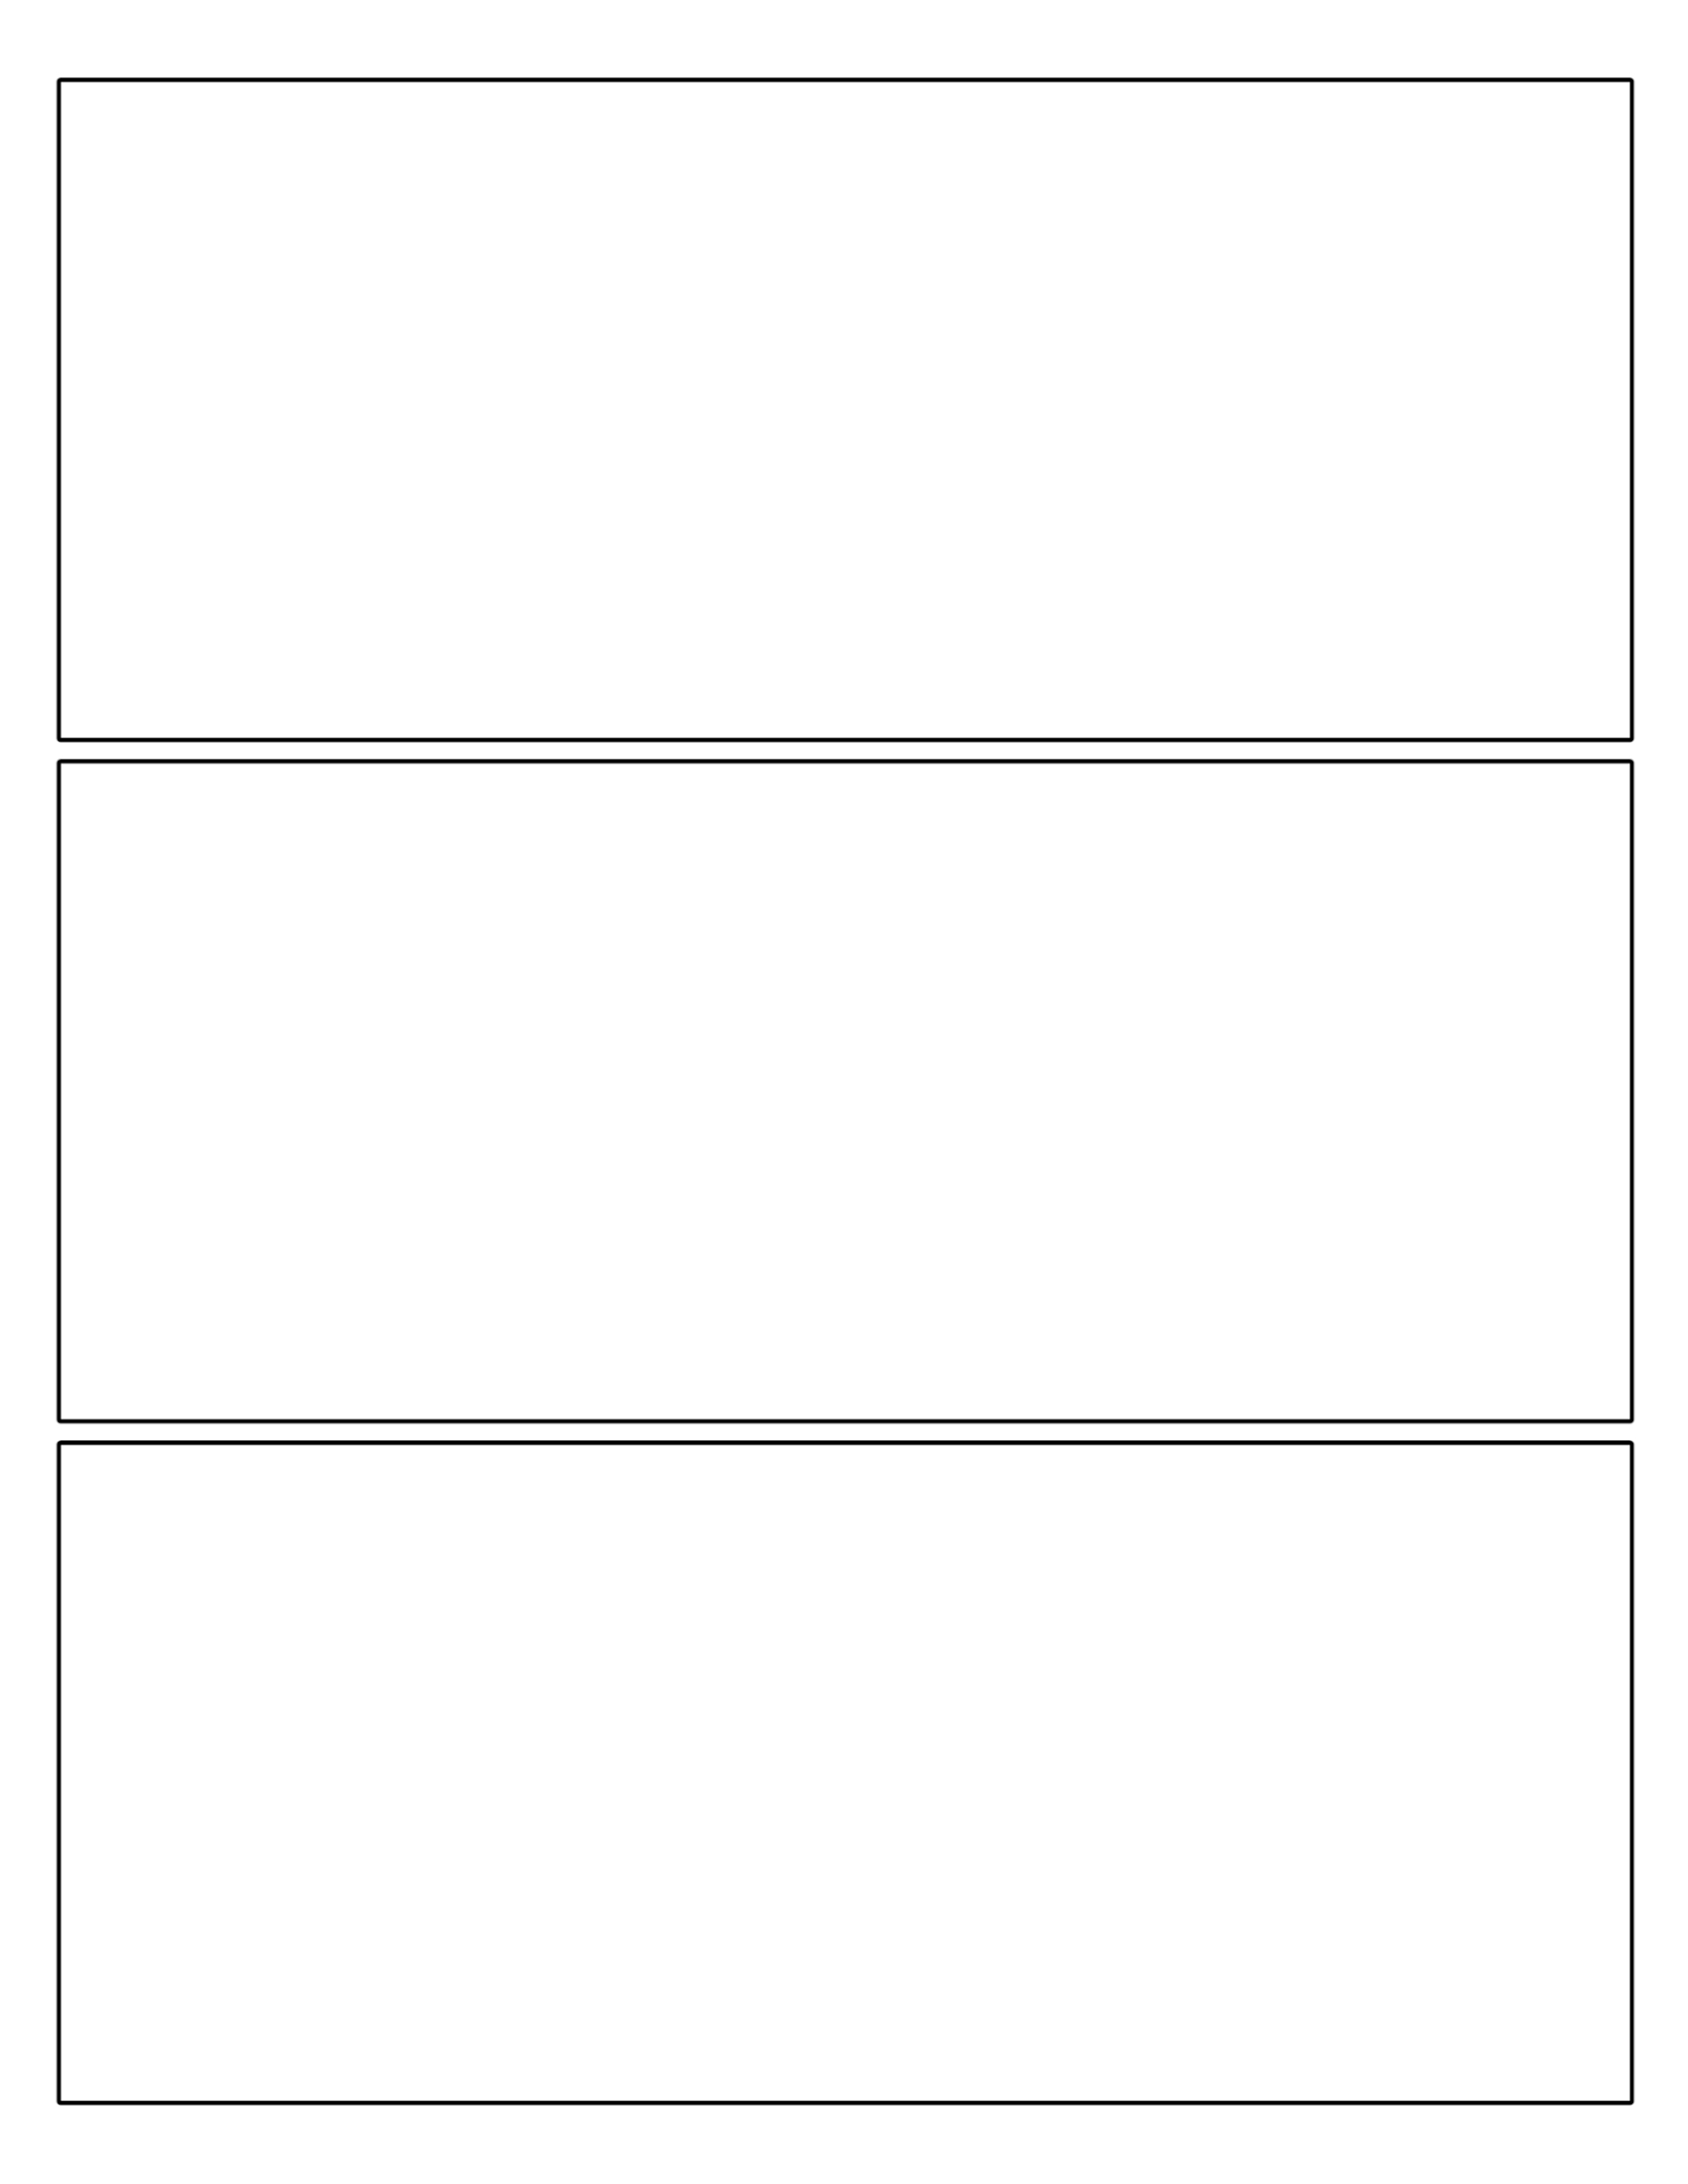 Comic Book Page Template from www.papertraildesign.com